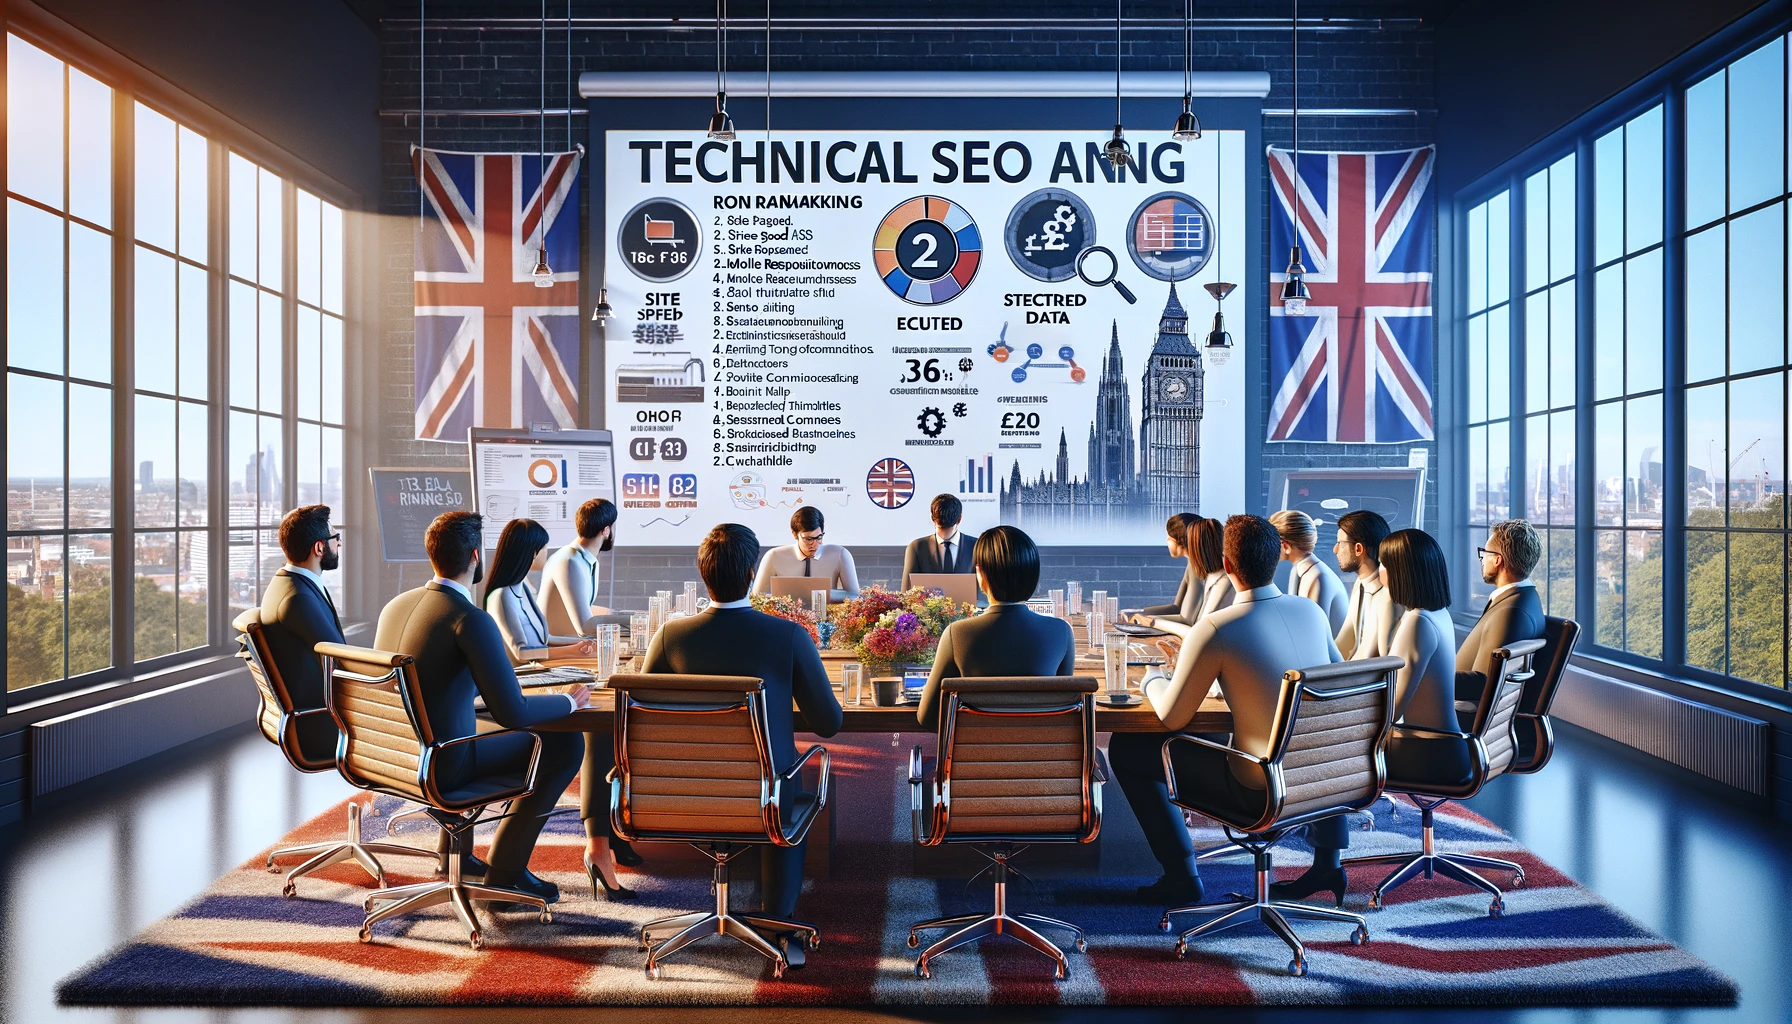 which website characteristics are also considered technical seo ranking factors